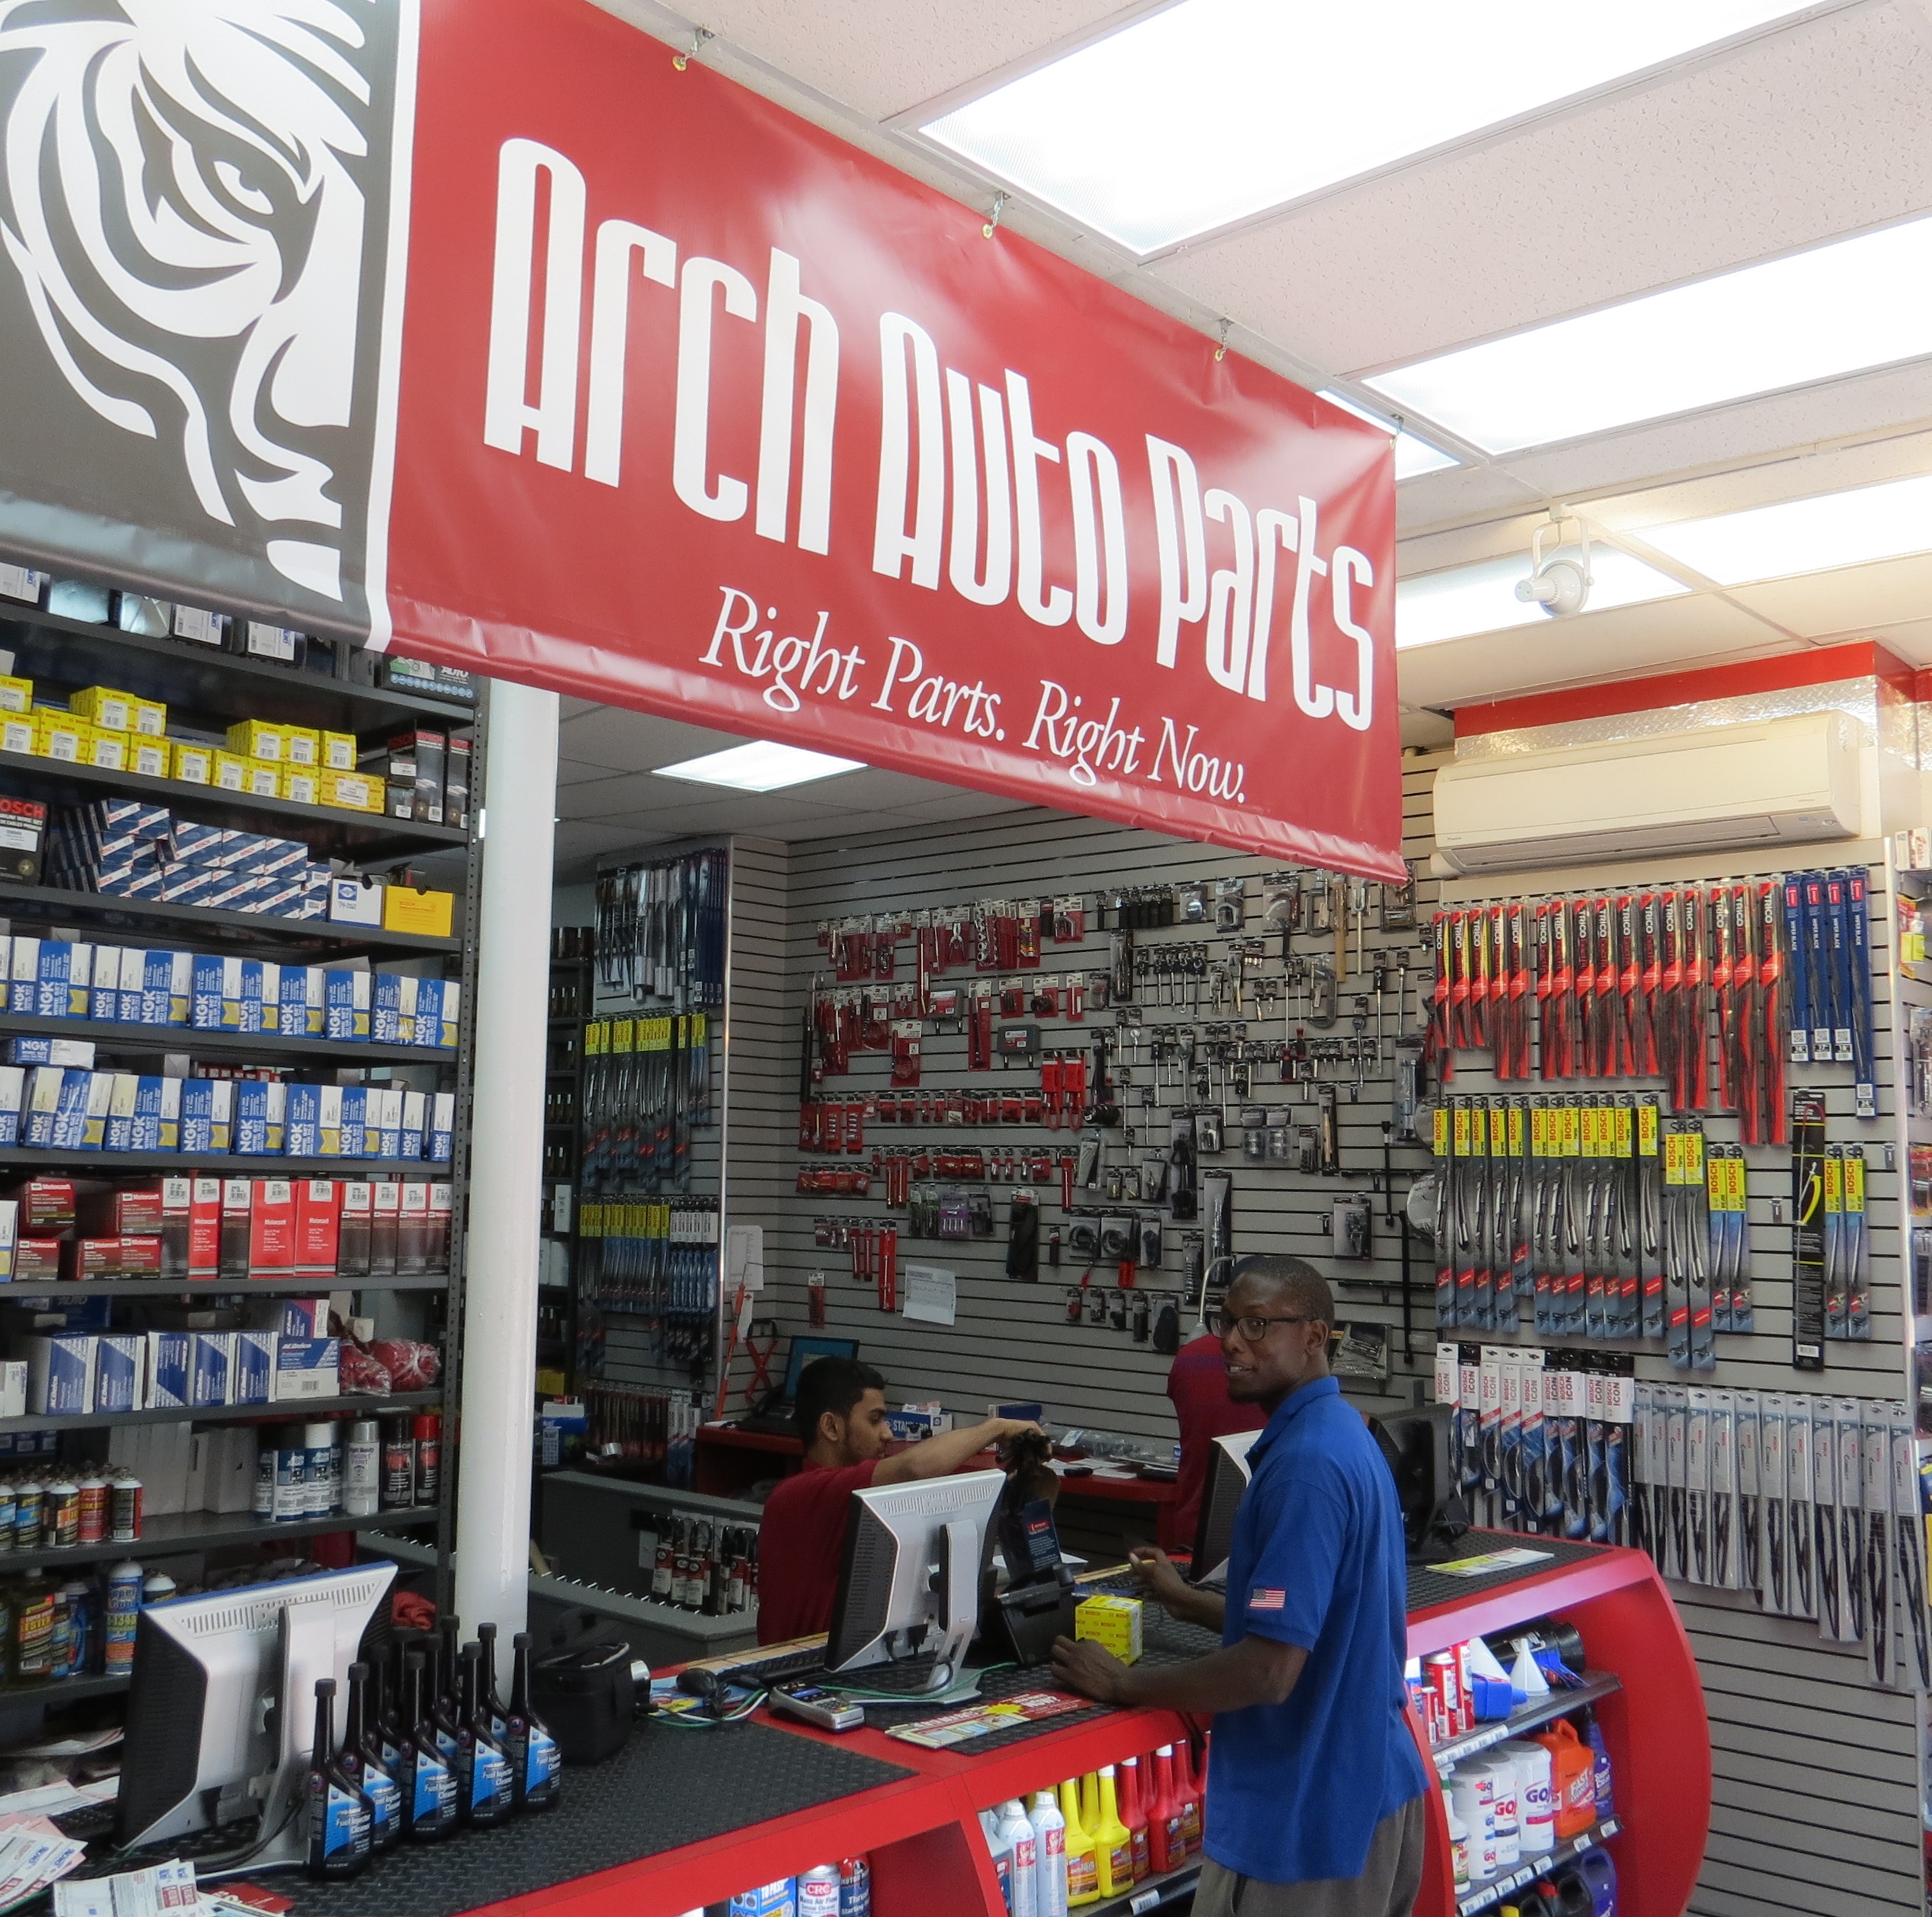 Arch Auto Parts 113-19 Atlantic Ave. Richmond Hill, NY now open with OE quality parts at low prices